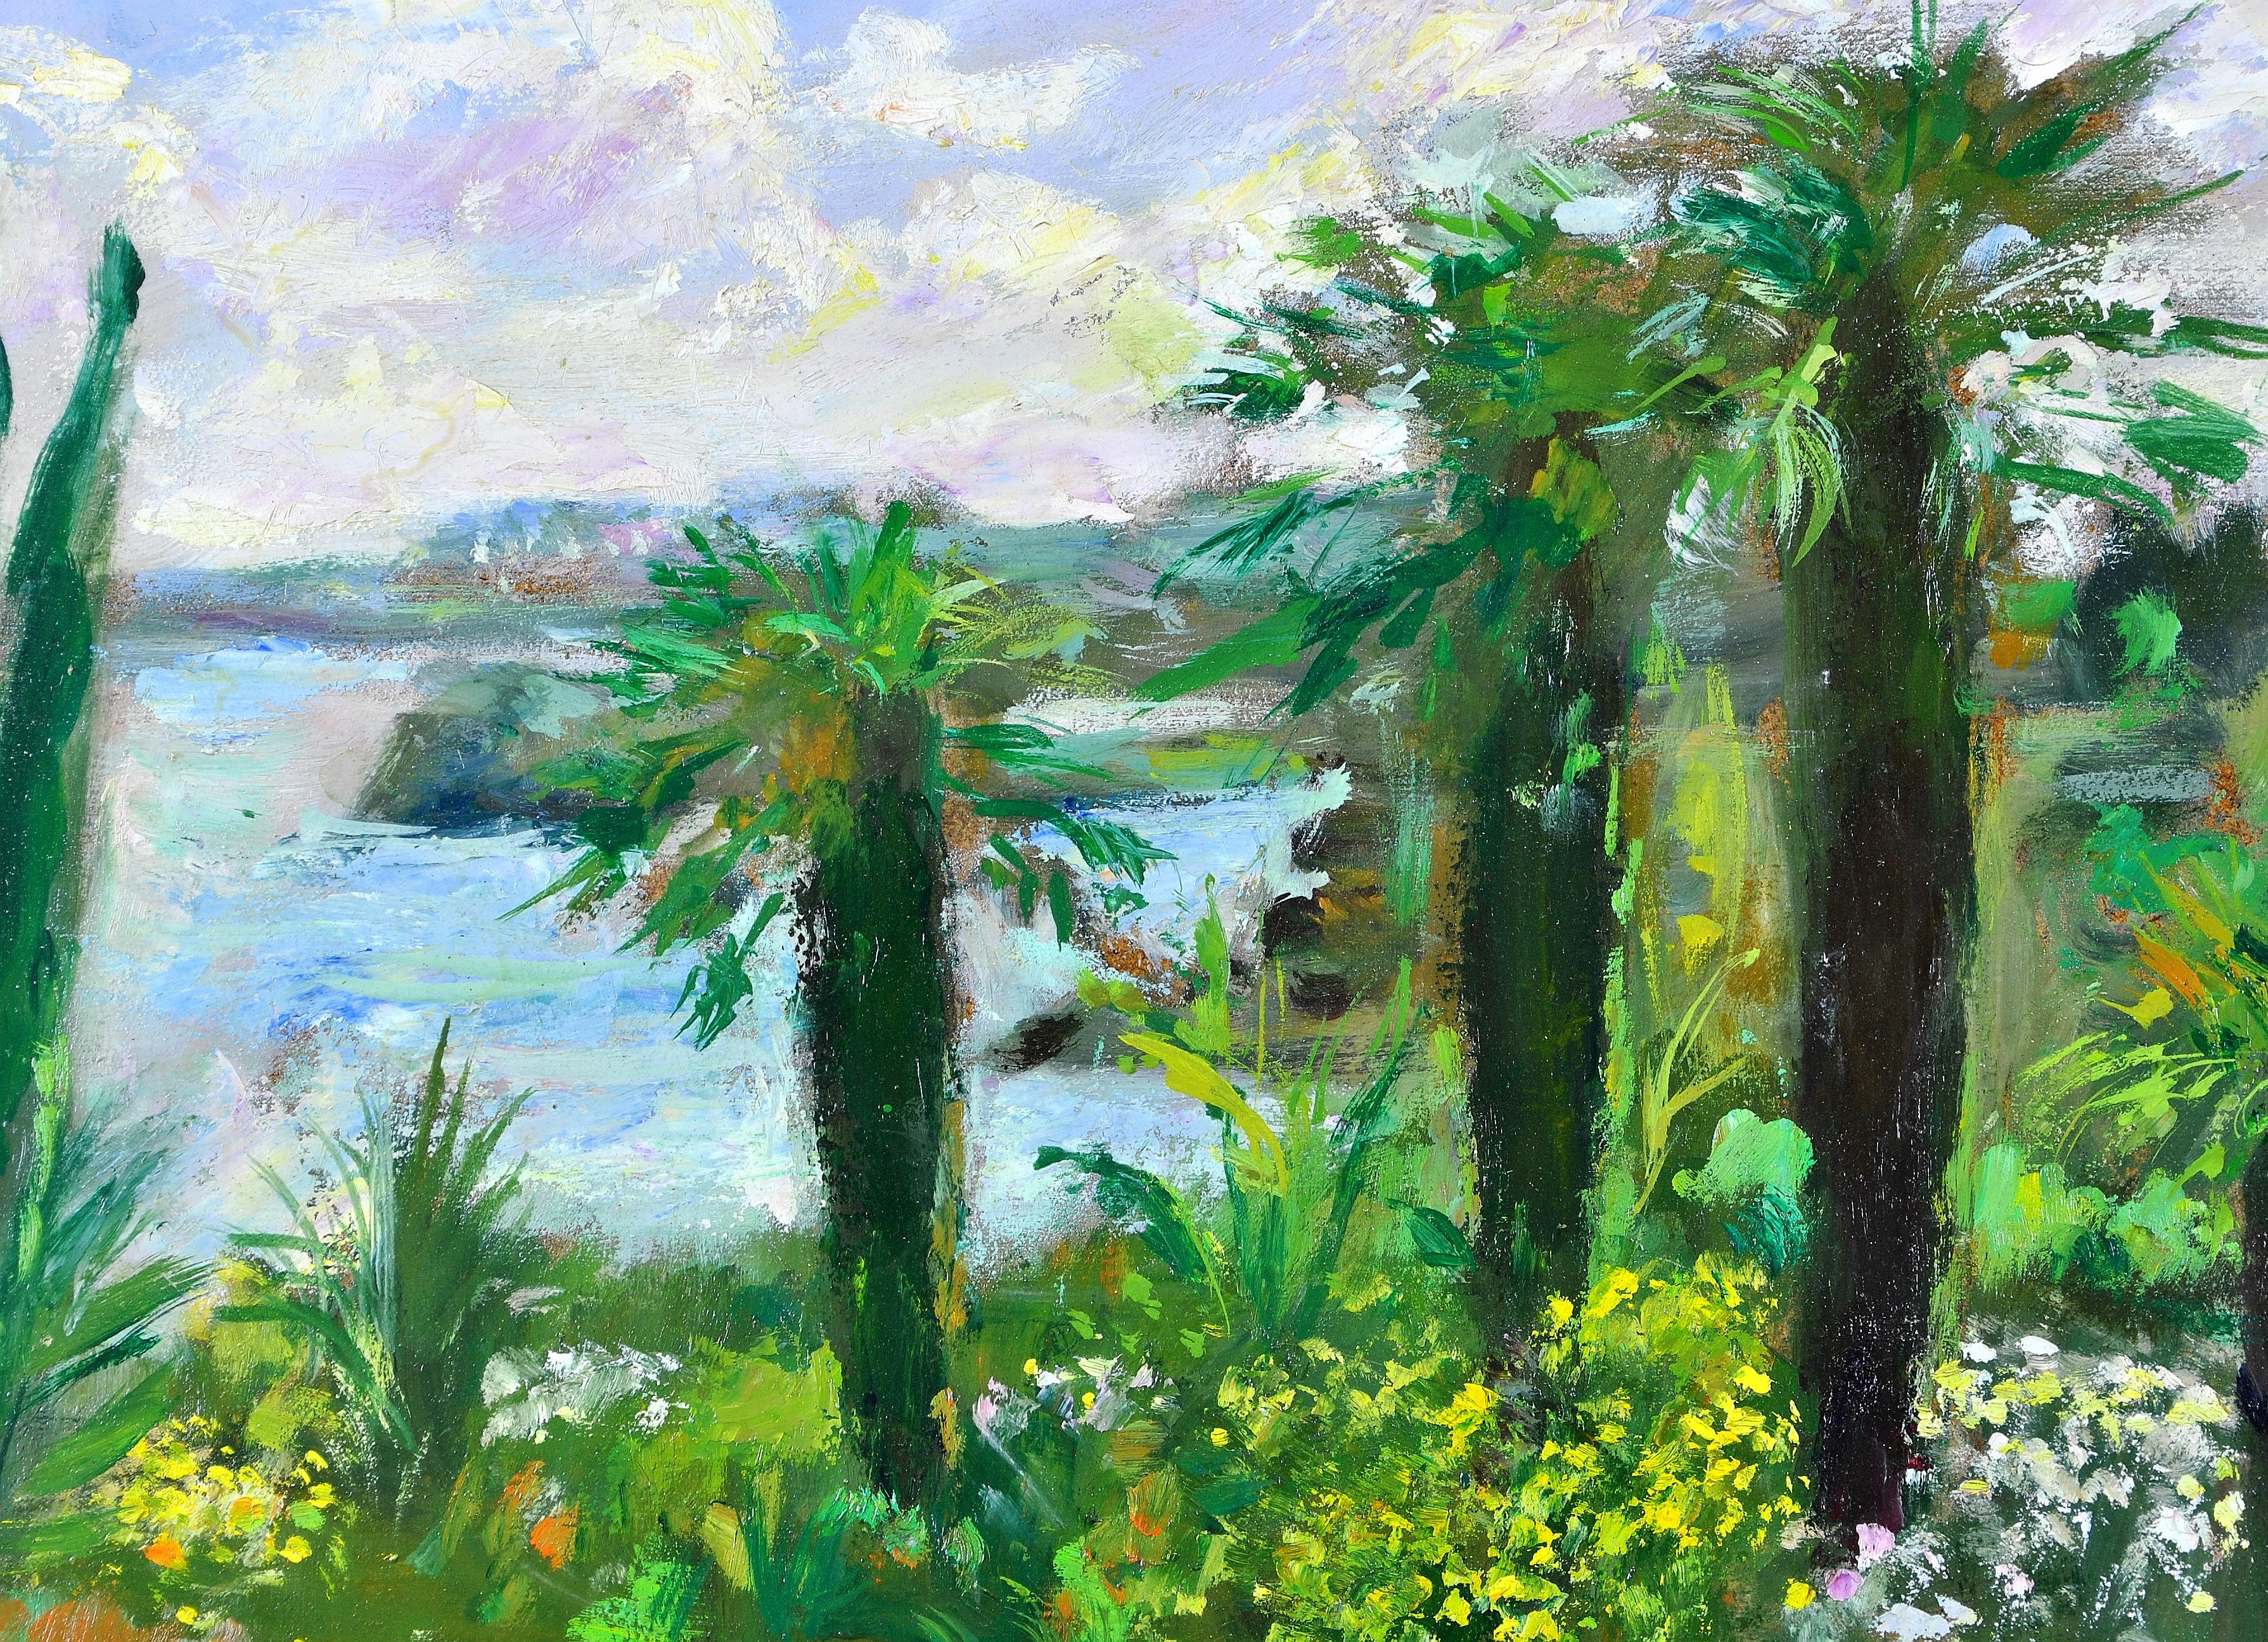 Côte d'Azur Palm Trees - French Riviera South of France Landscape Oil Painting For Sale 1